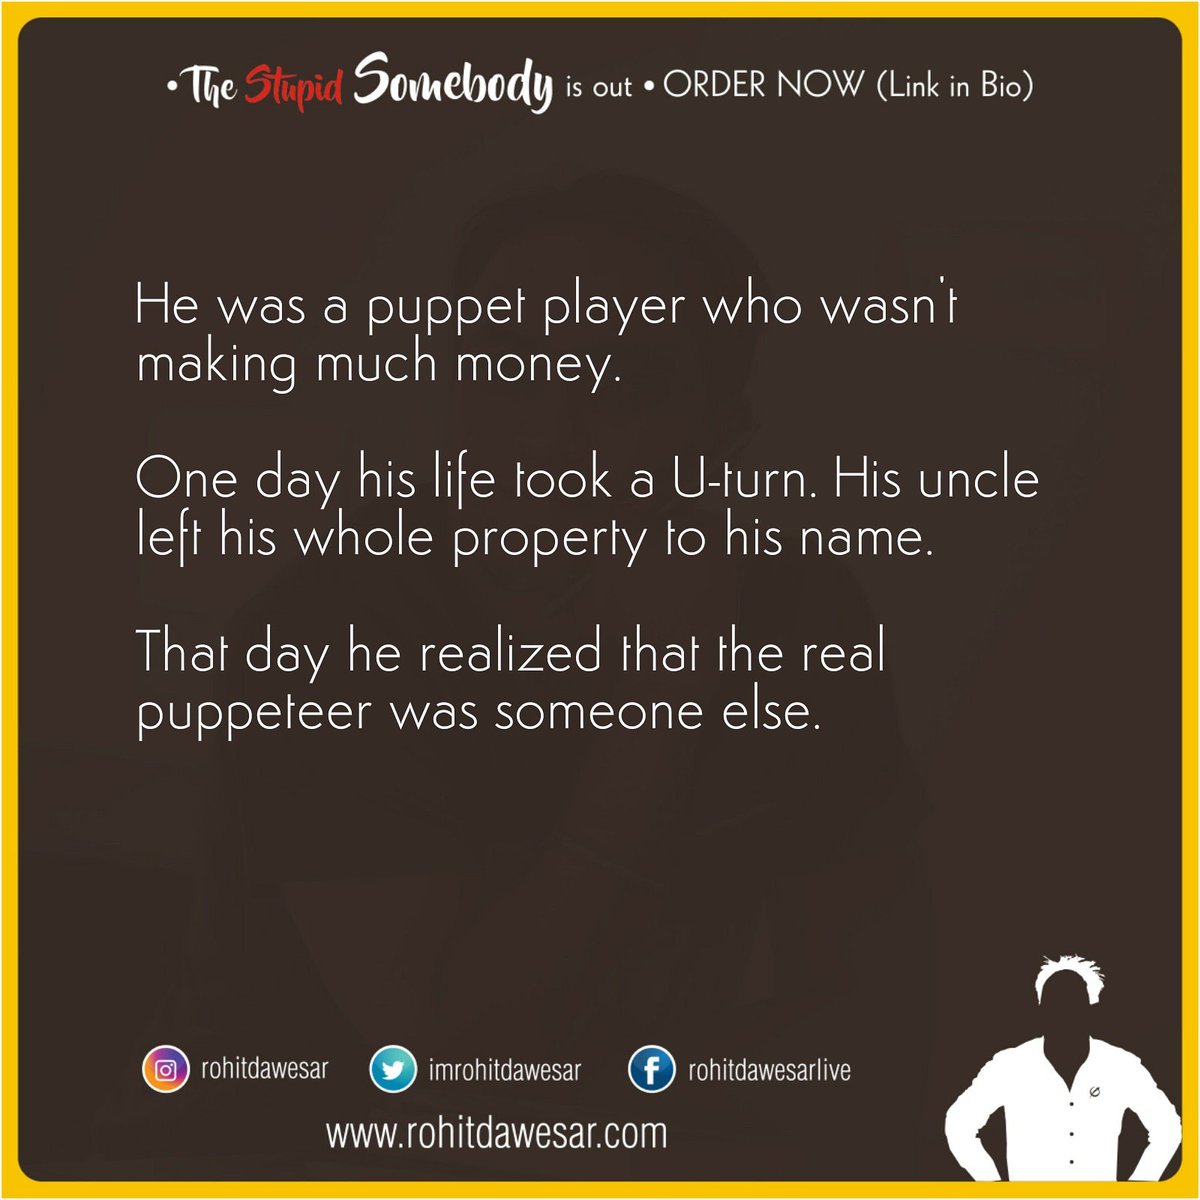 'Puppeteer!' 
New NanoTale 😊

Watch for NanoTales every Wednesday and Sunday. ❤️
.
.
#Puppet #Puppeteer 
#NanoTale #ShortStories
#TheStupidSomebody #TSS
#NanoTalesByRohit #BestSeller #Bestsellers #BestsellingAuthor #BestSelling #Novel #BestsellerNovel #BestsellingNovel